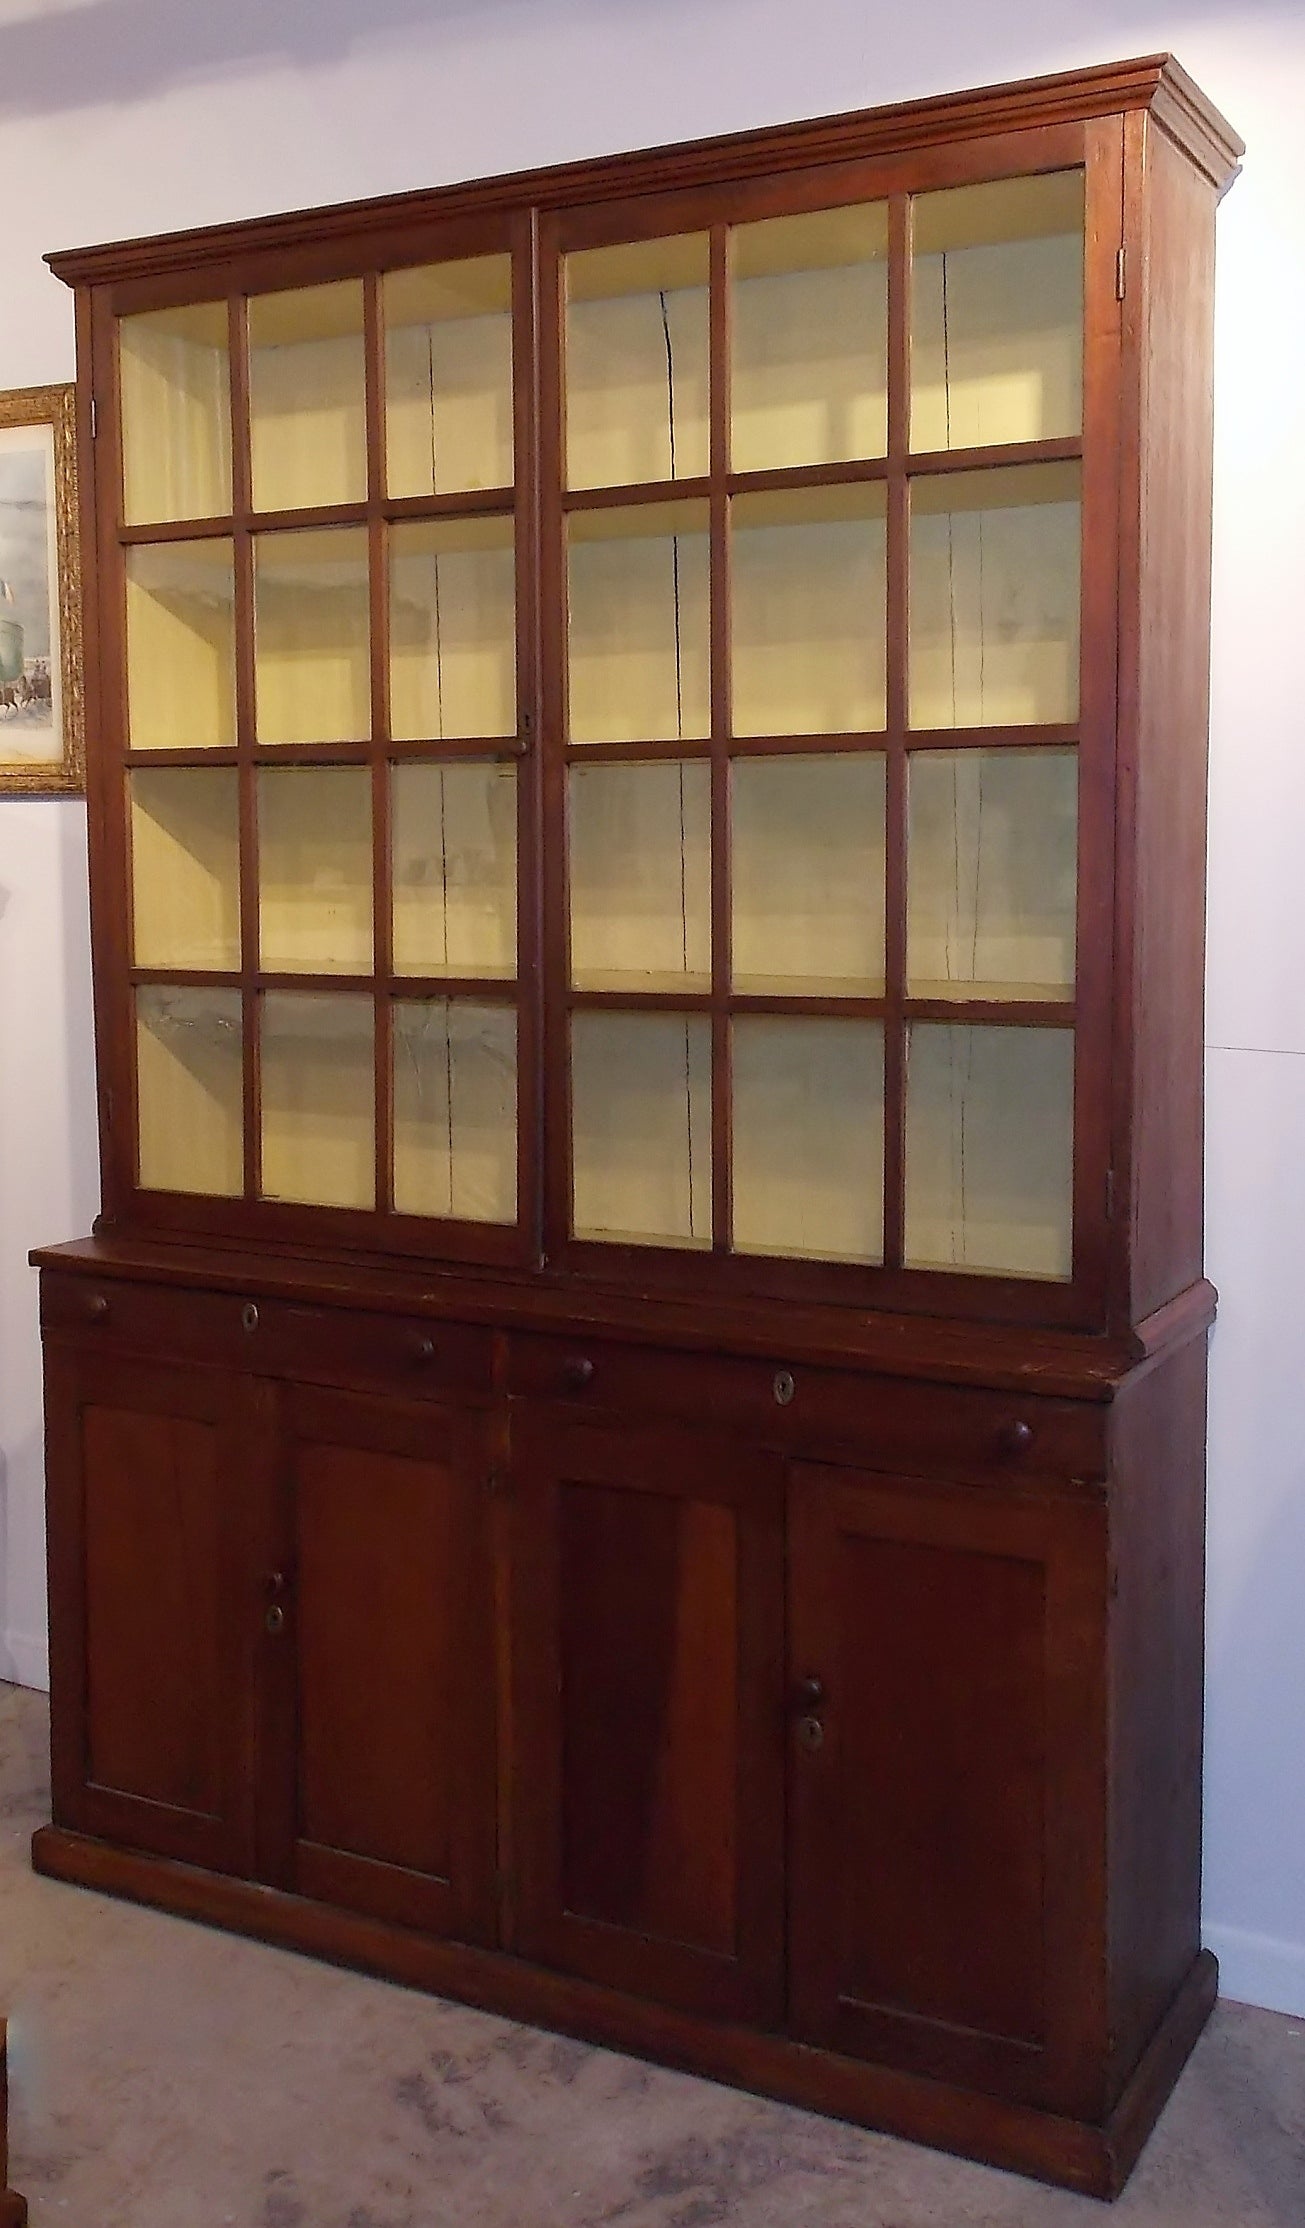 Early 19th c. Cherry Stepback Cupboard with Glazed Doors